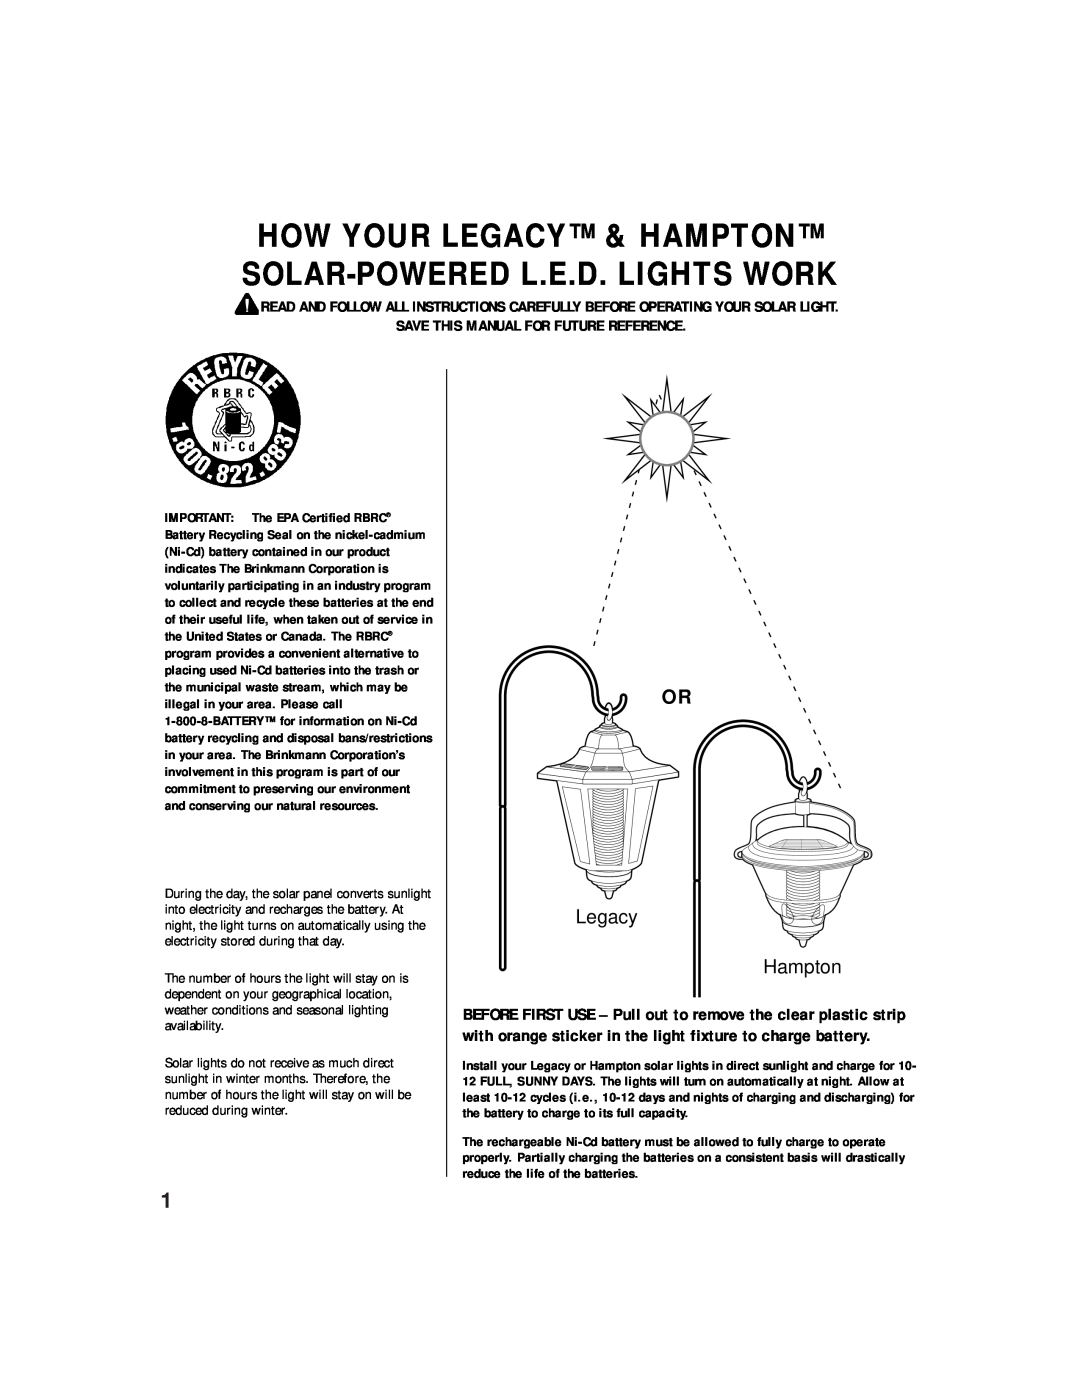 Brinkmann ENDURA How Your Legacy & Hampton Solar-Powered L.E.D. Lights Work, Save This Manual For Future Reference 